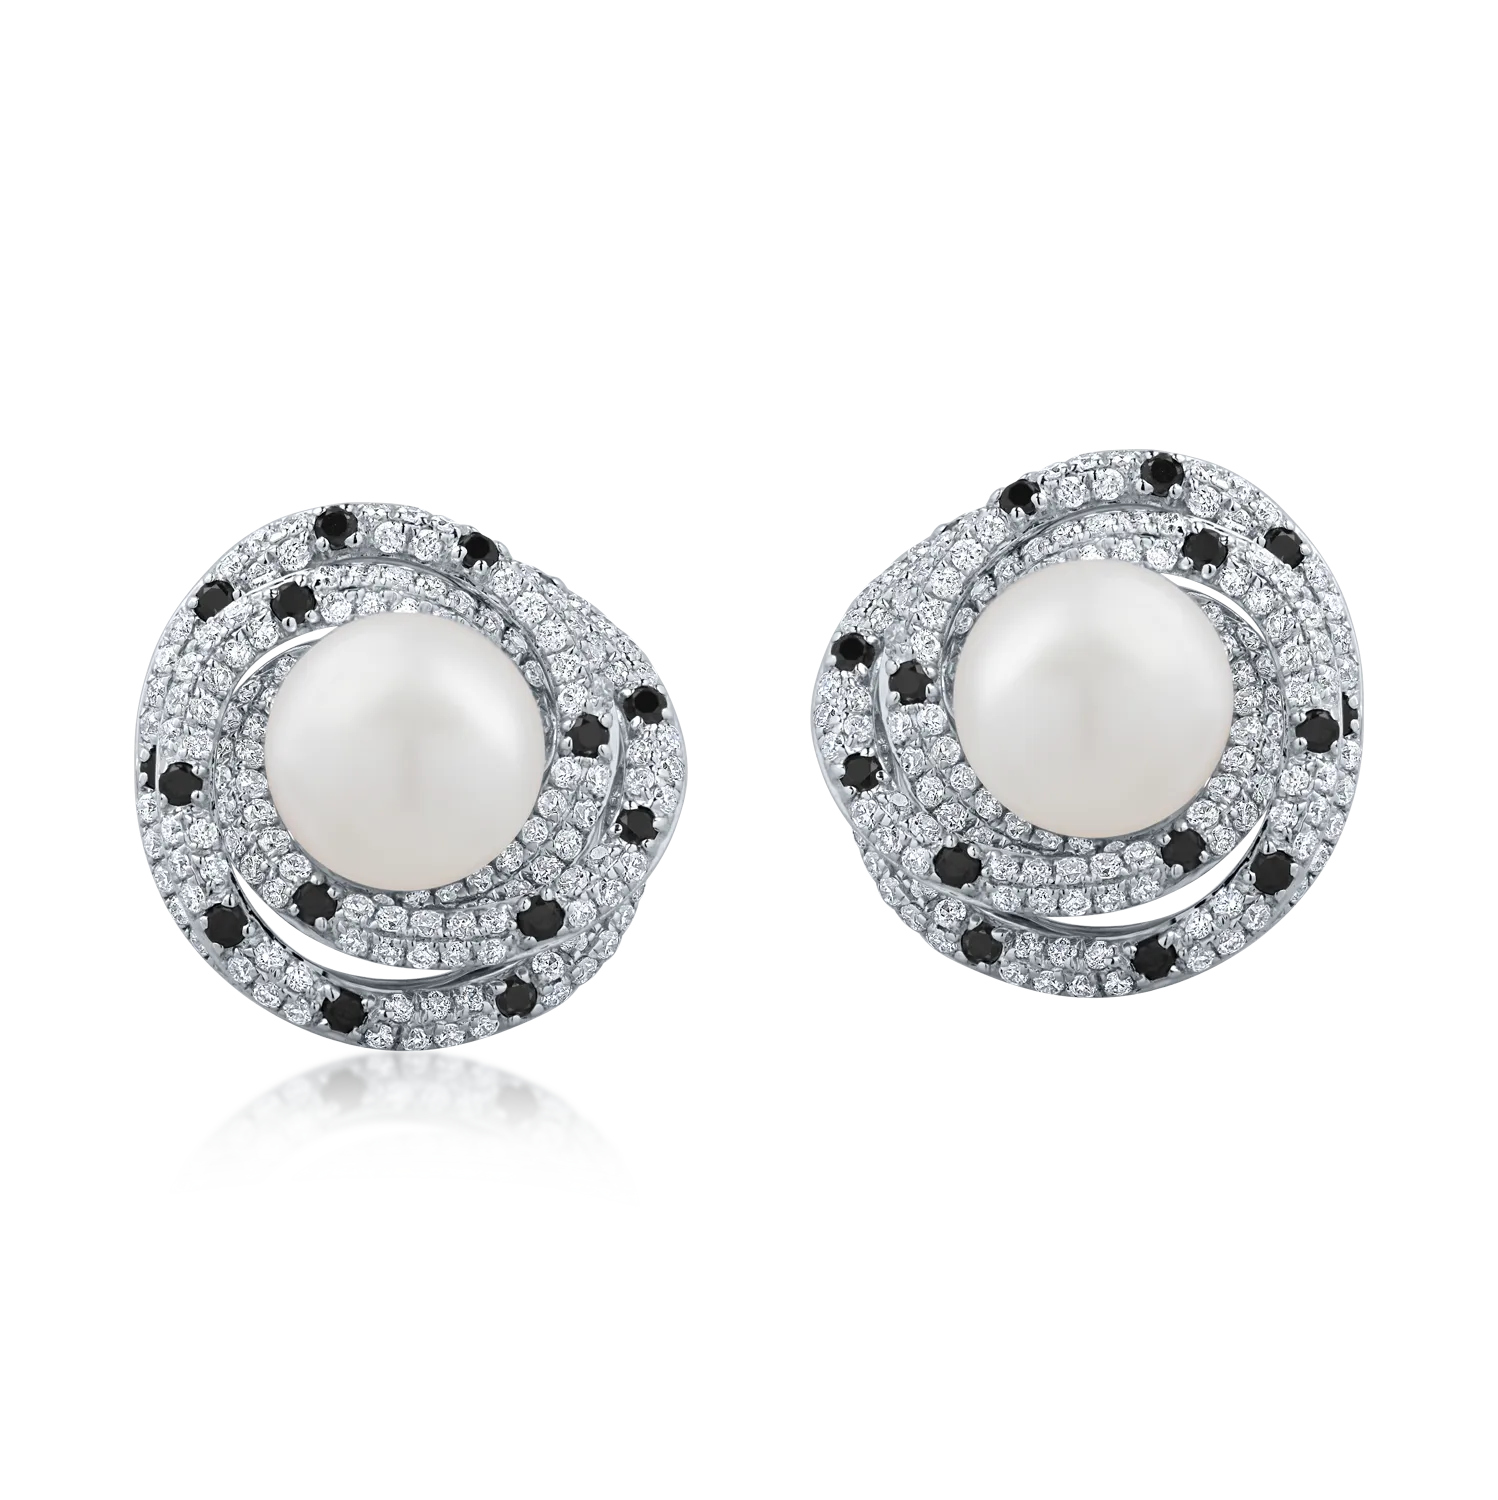 White gold earrings with 1.9ct fresh water pearls and 1.1ct diamonds